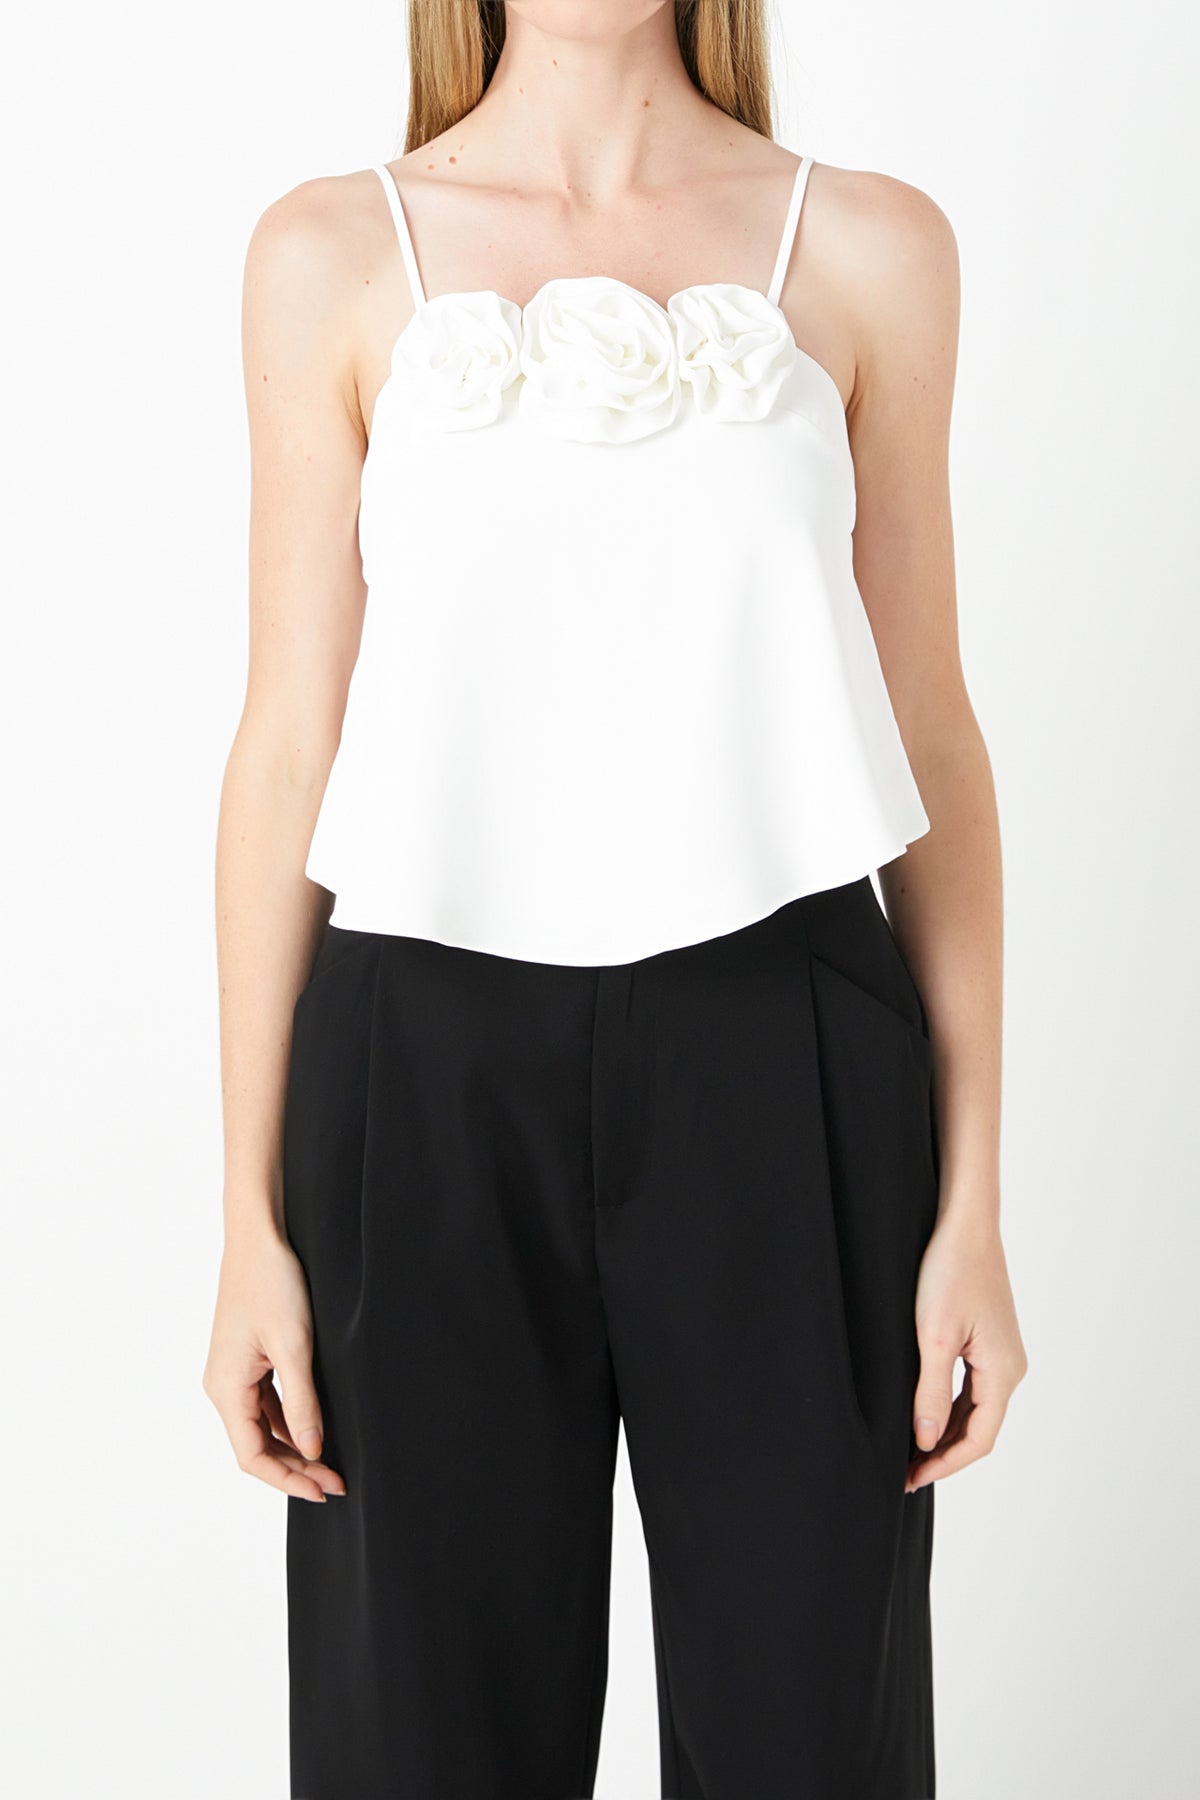 ENDLESS ROSE - Corsage Bow Flowy Top - TOPS available at Objectrare